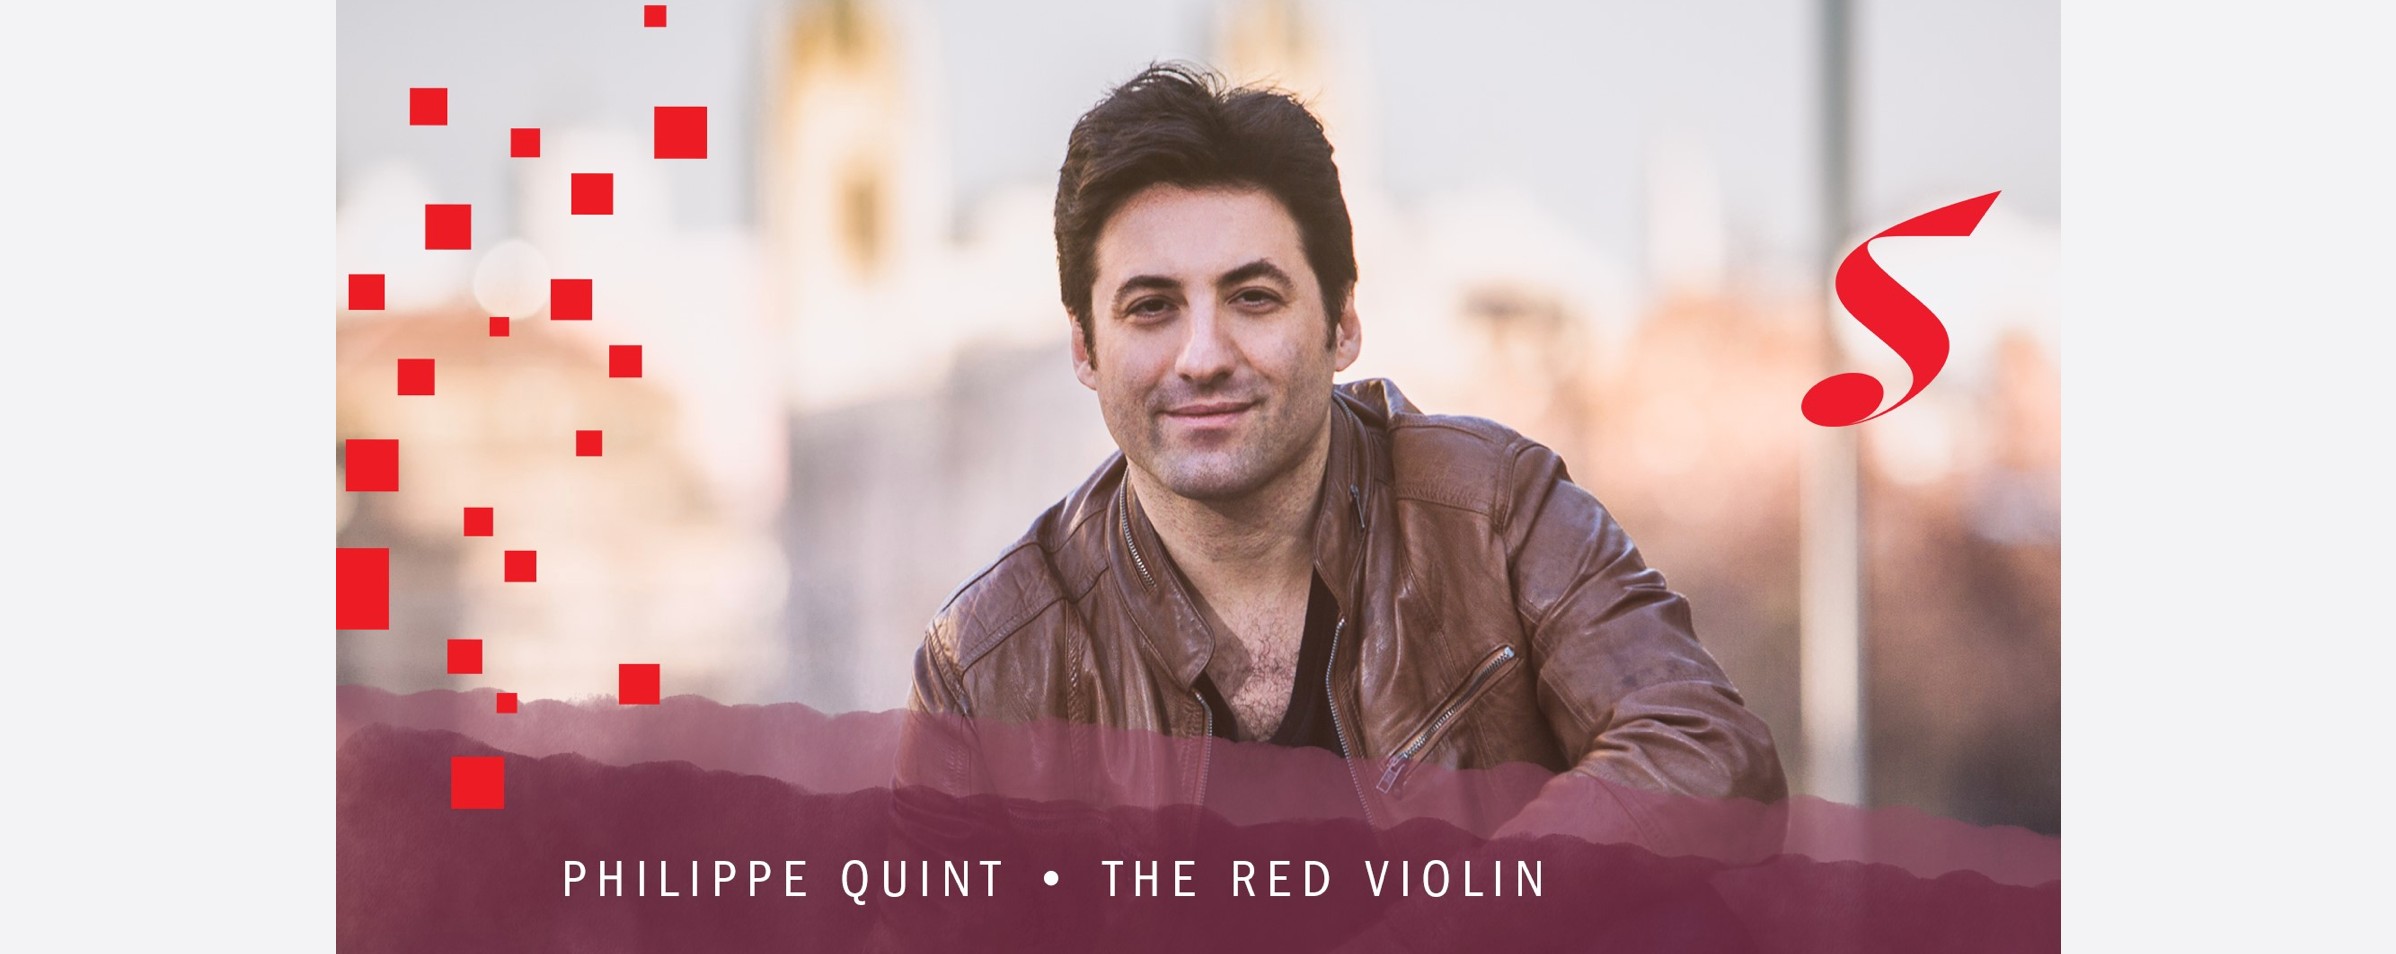 Philippe Quint • The Red Violin